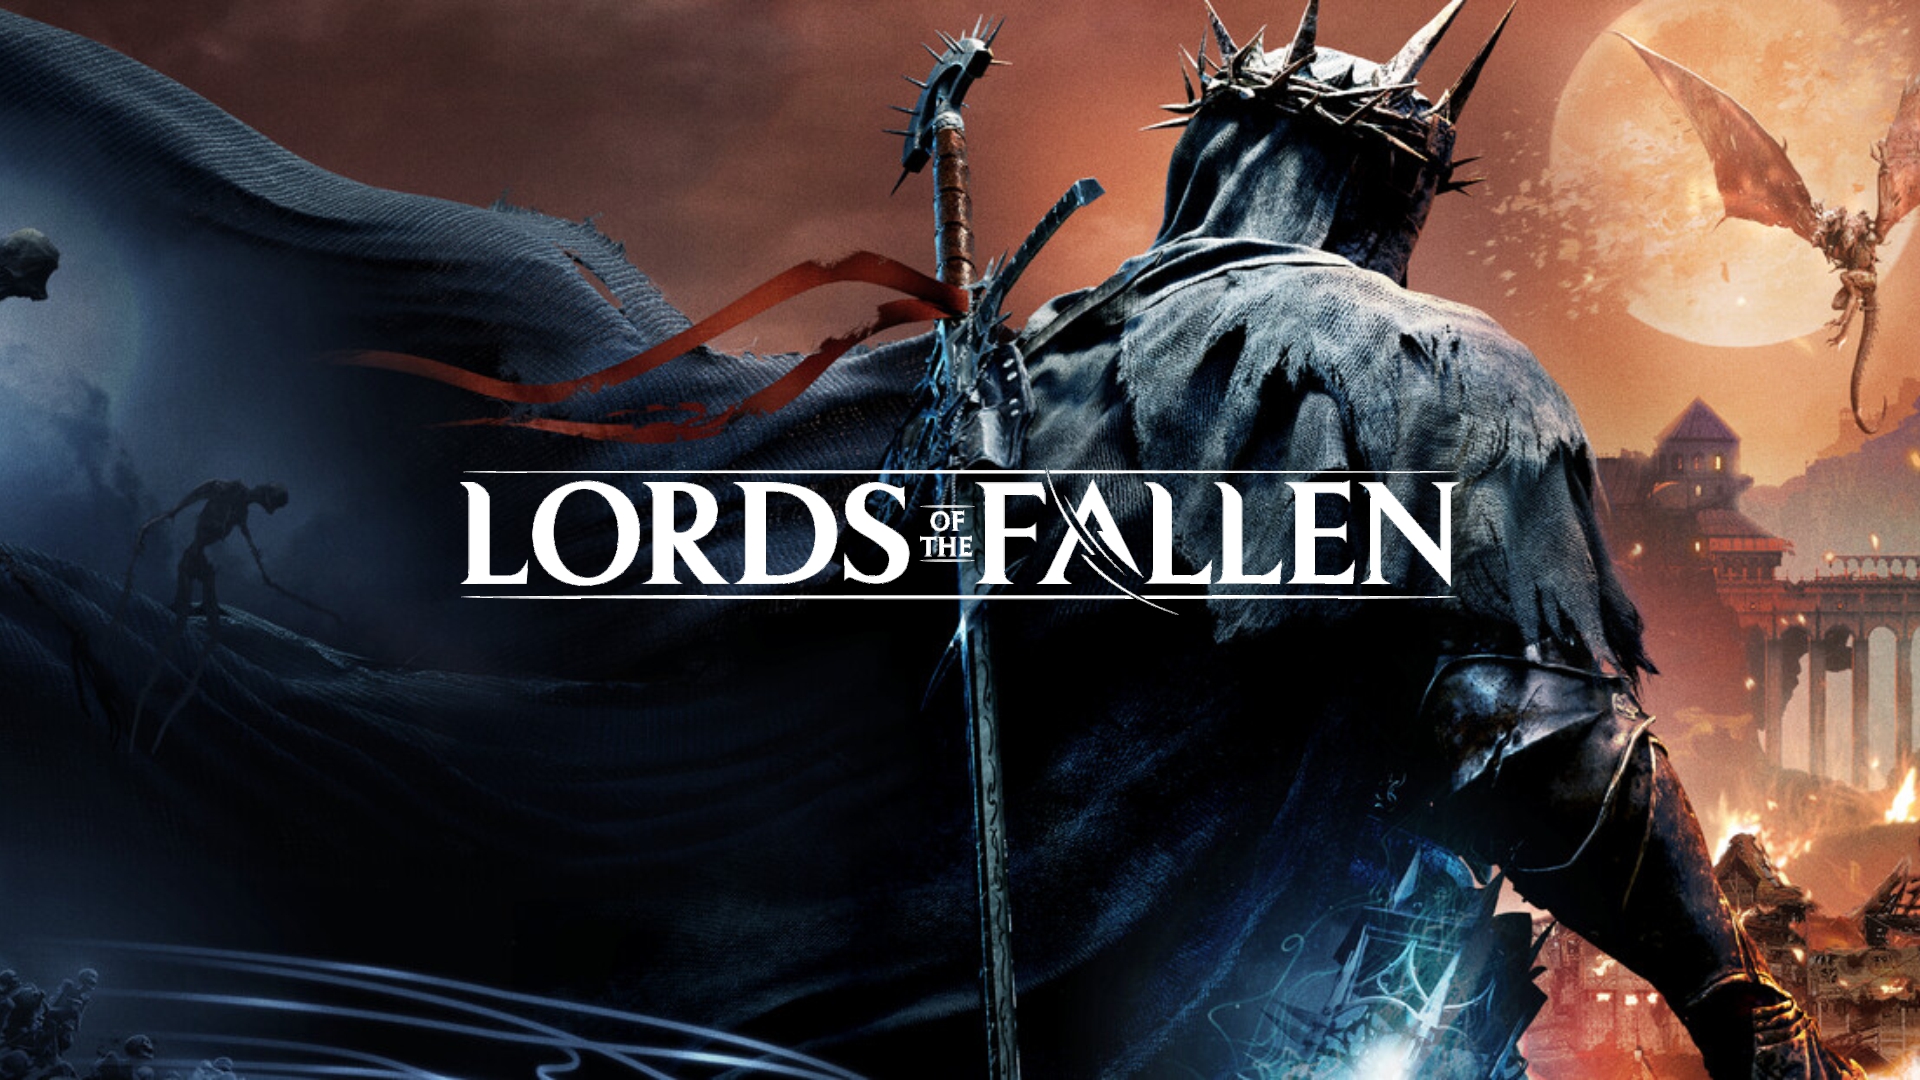 The Lords of the Fallen release date, trailer & latest news